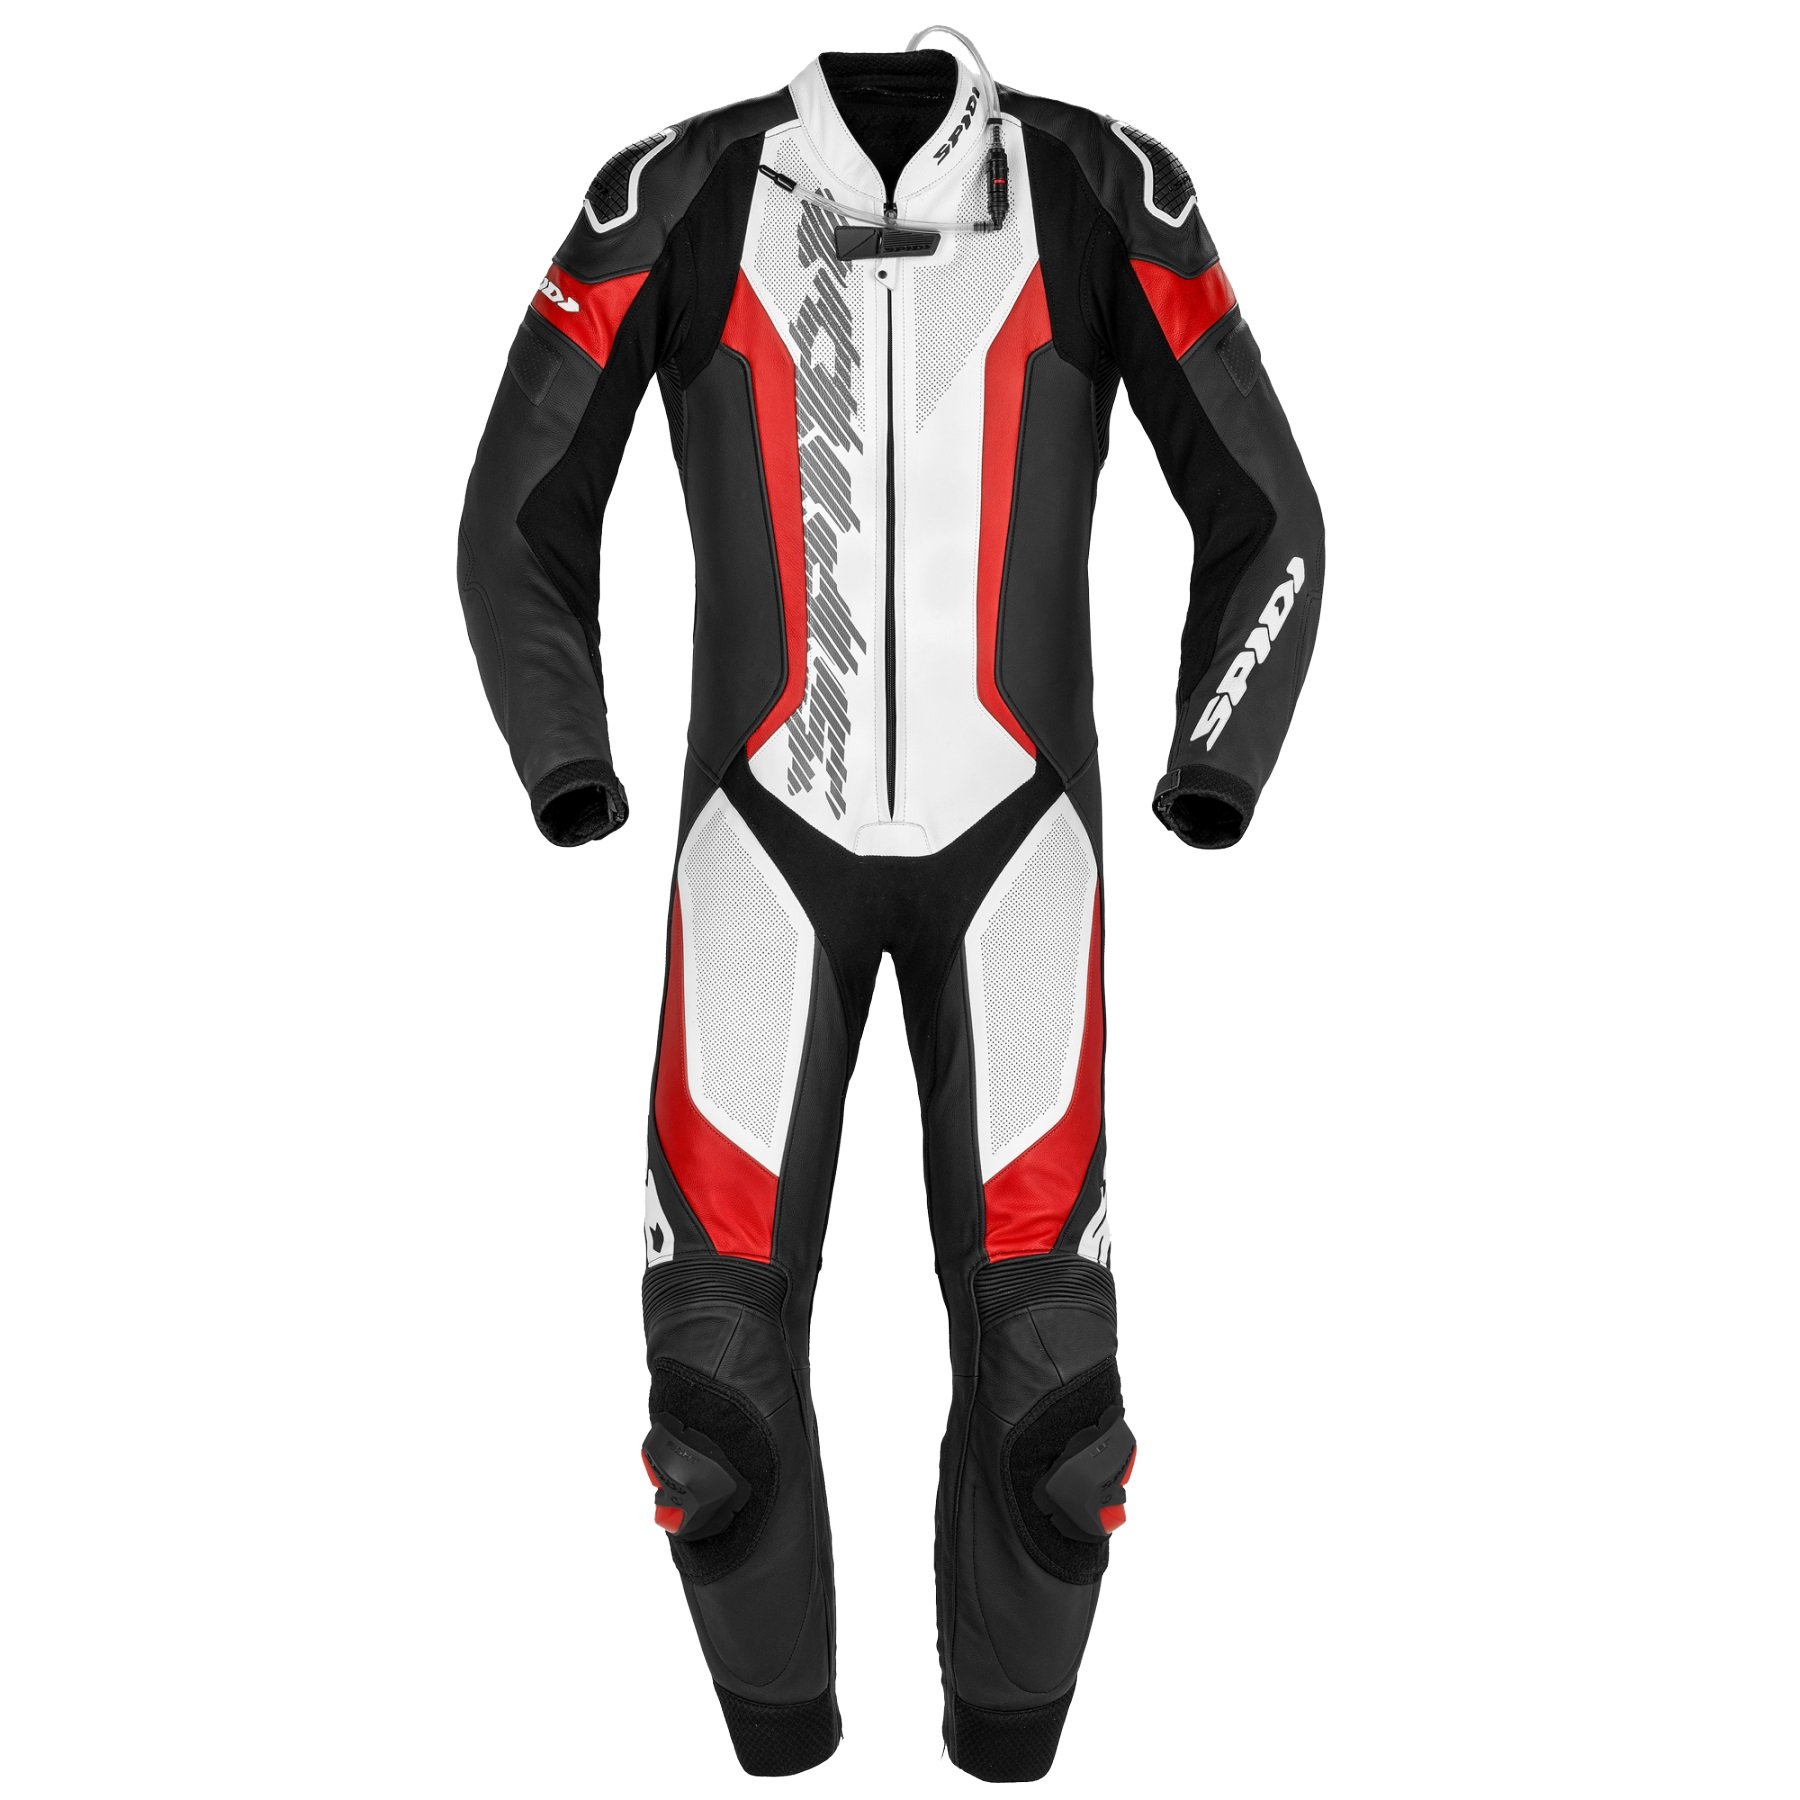 Image of Spidi Laser Pro Perforated Red 1 Piece Motorcycle Racing Suit Talla 52